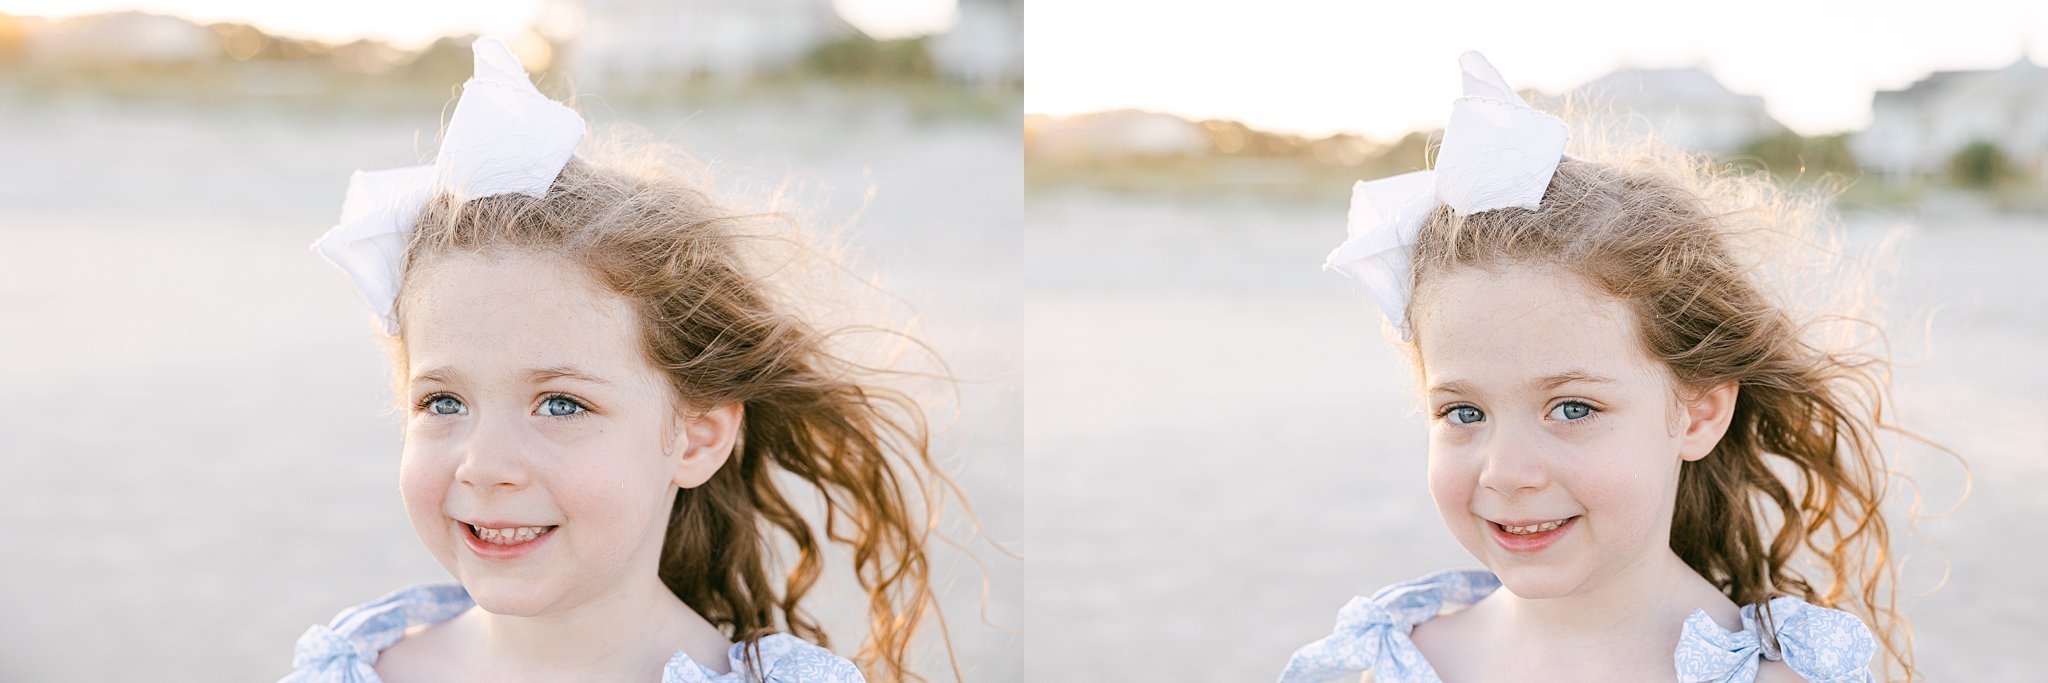 Katherine_Ives_Photography_Chod_Hilton_Head_Extended_Family_Session_113.JPG